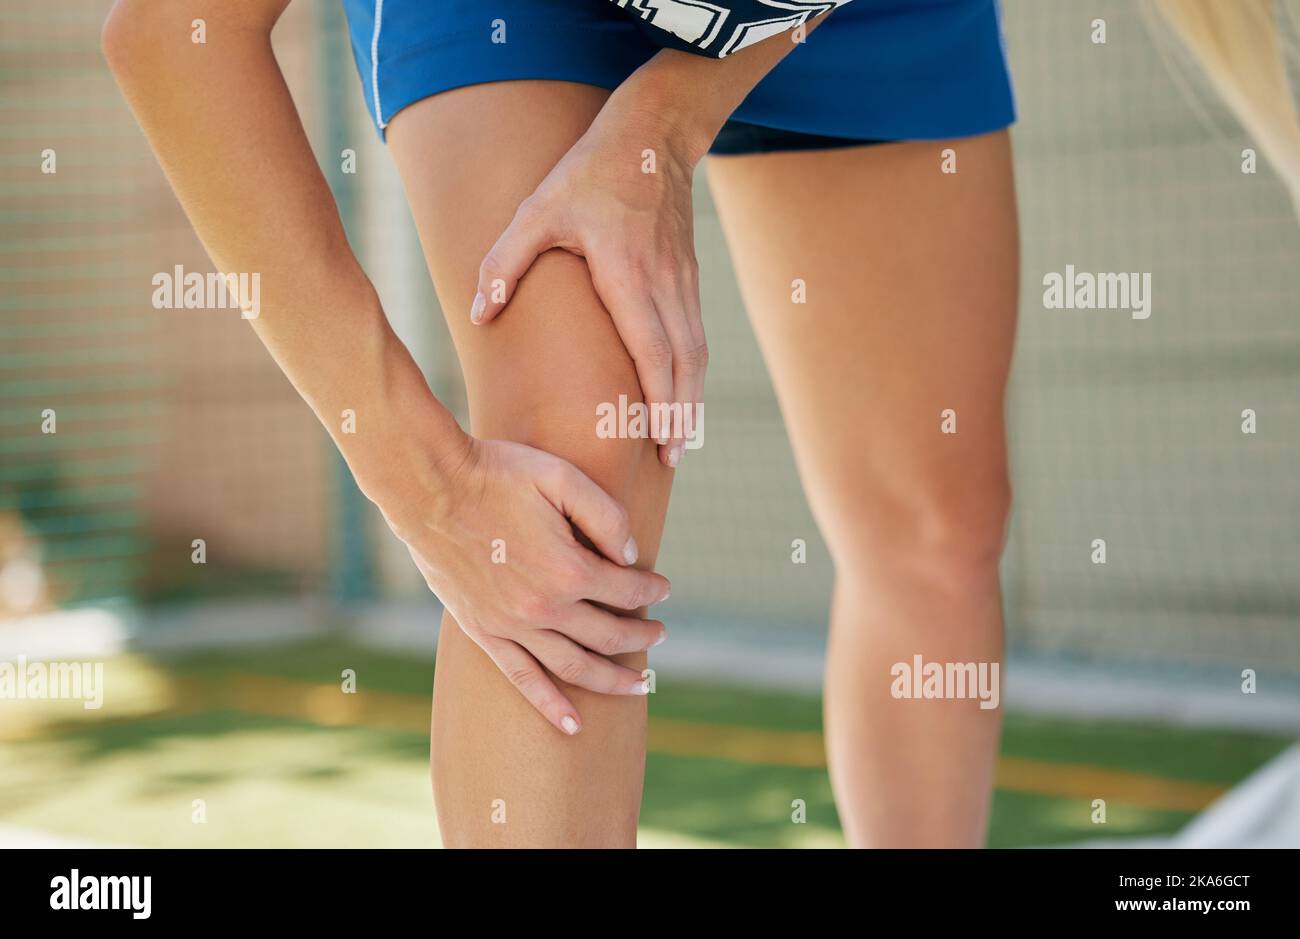 Netball hands, sports muscle and woman injury with medical emergency during sport game on court. Professional athlete with pain after knee accident or Stock Photo